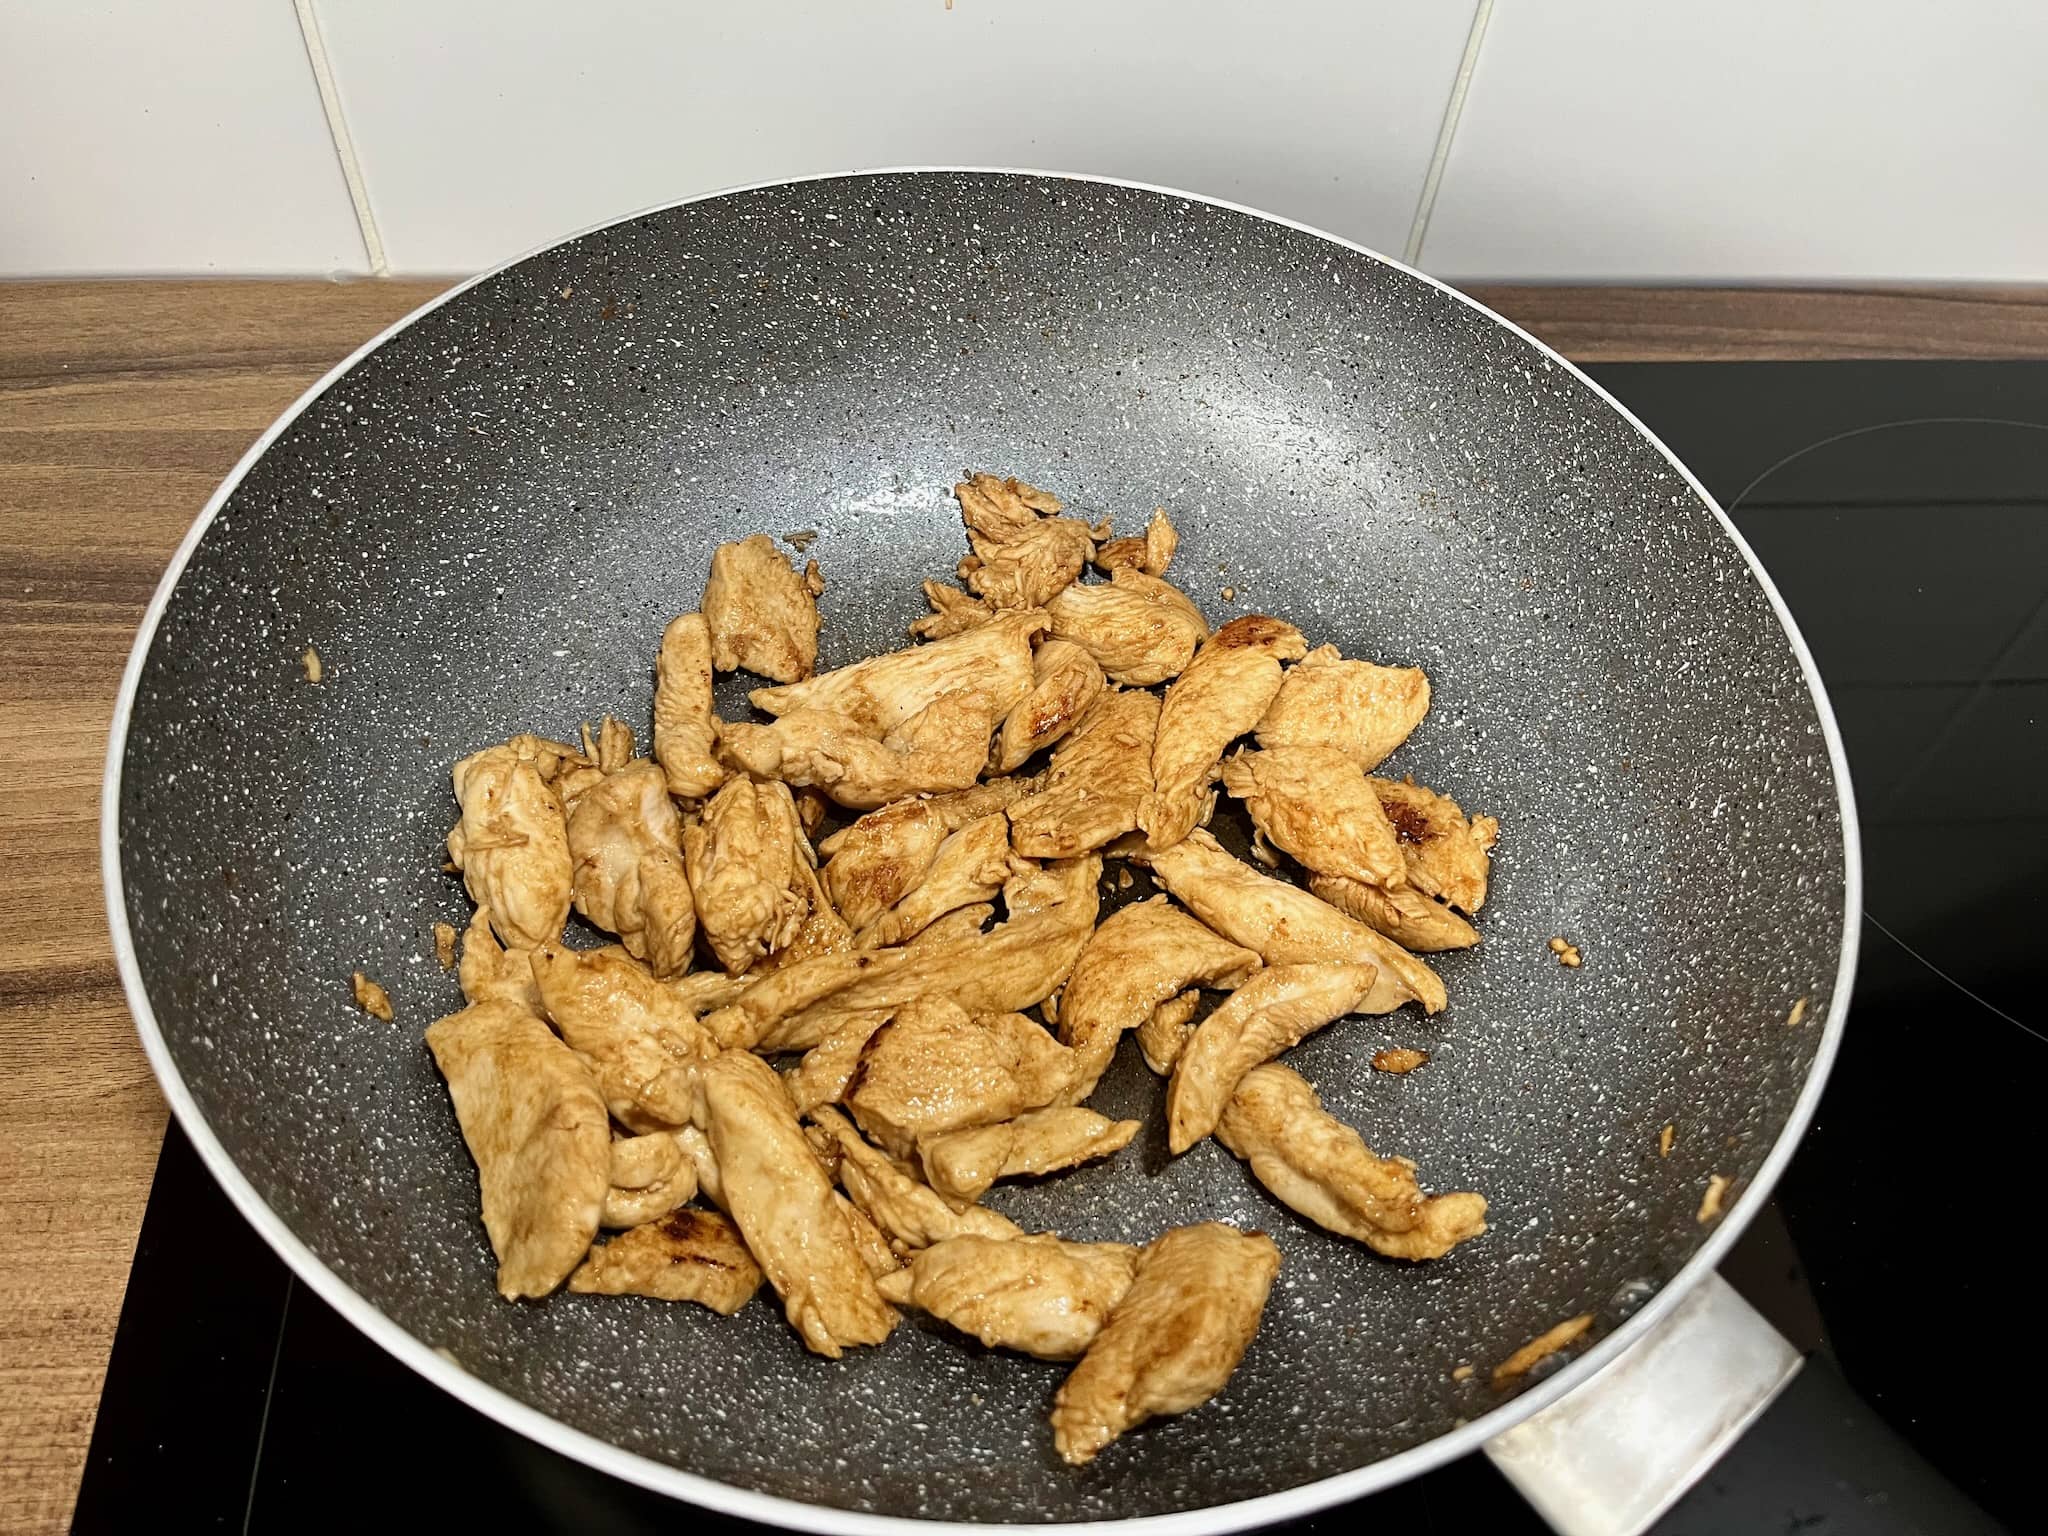 Cooked chicken in a pan with soy sauce